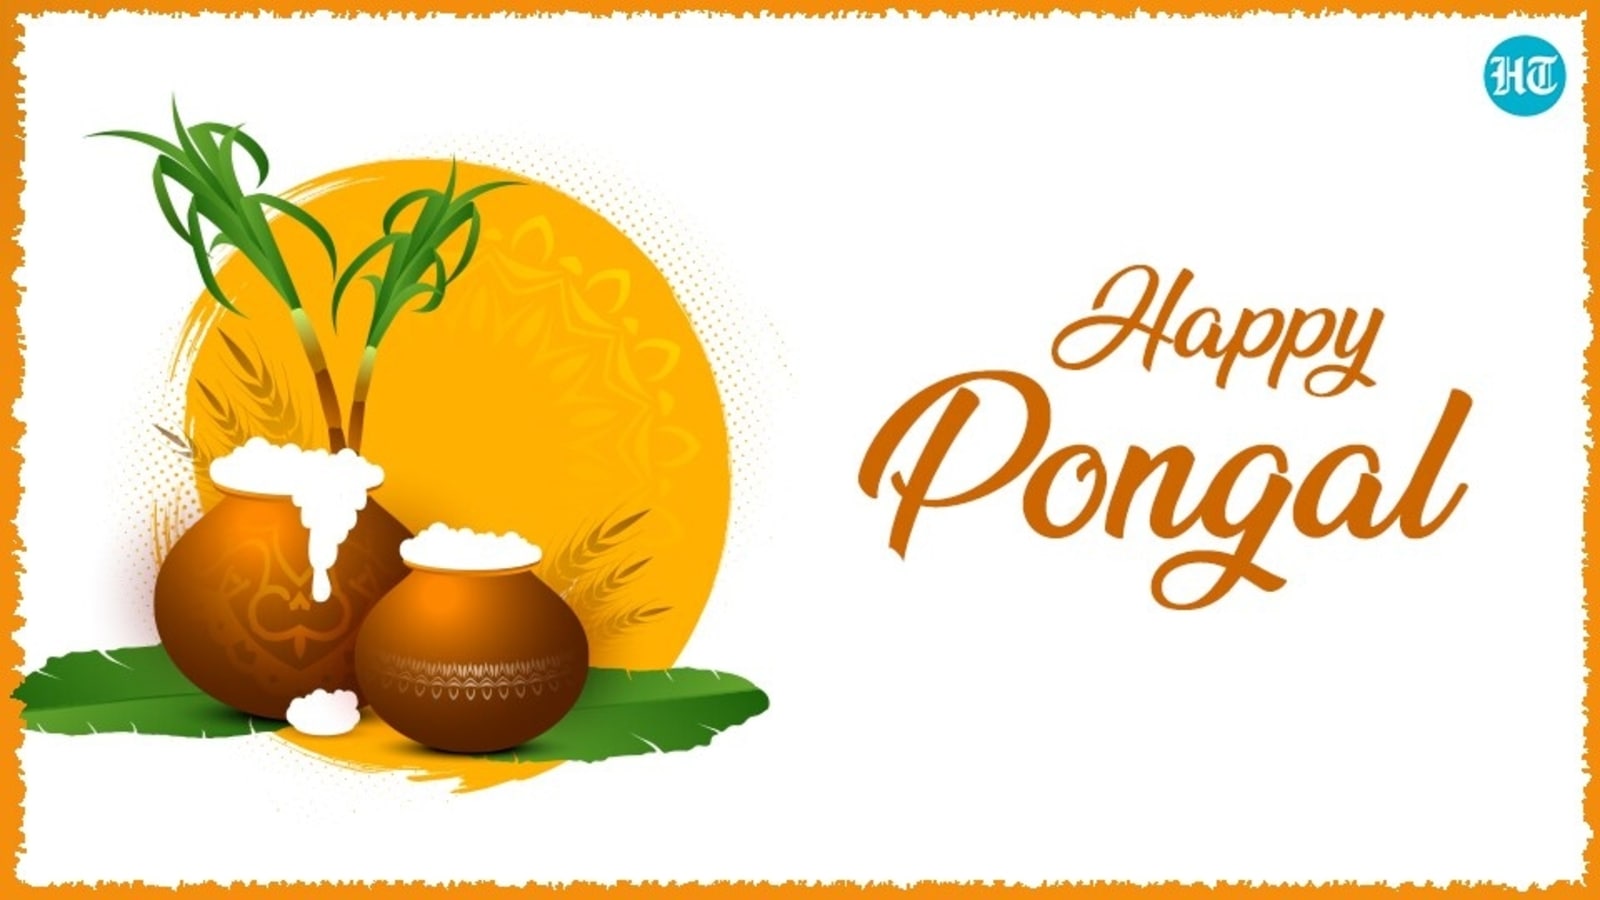 Top 999+ happy pongal wishes images – Amazing Collection happy pongal wishes images Full 4K